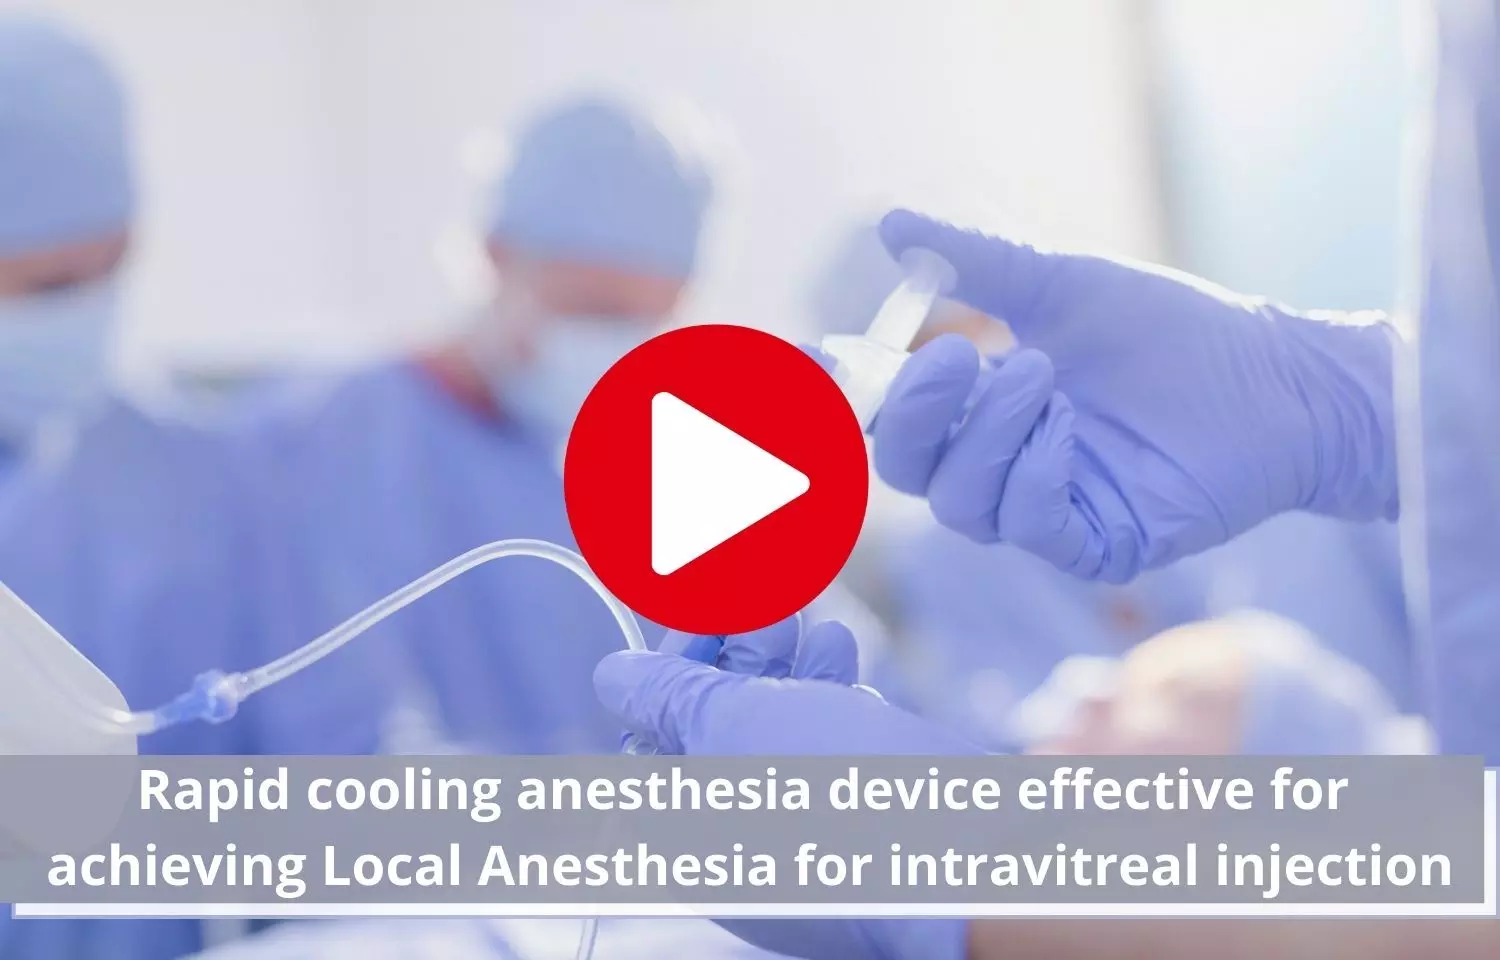 Rapid cooling anesthetic device helps in achieving LA for intravitreal injection